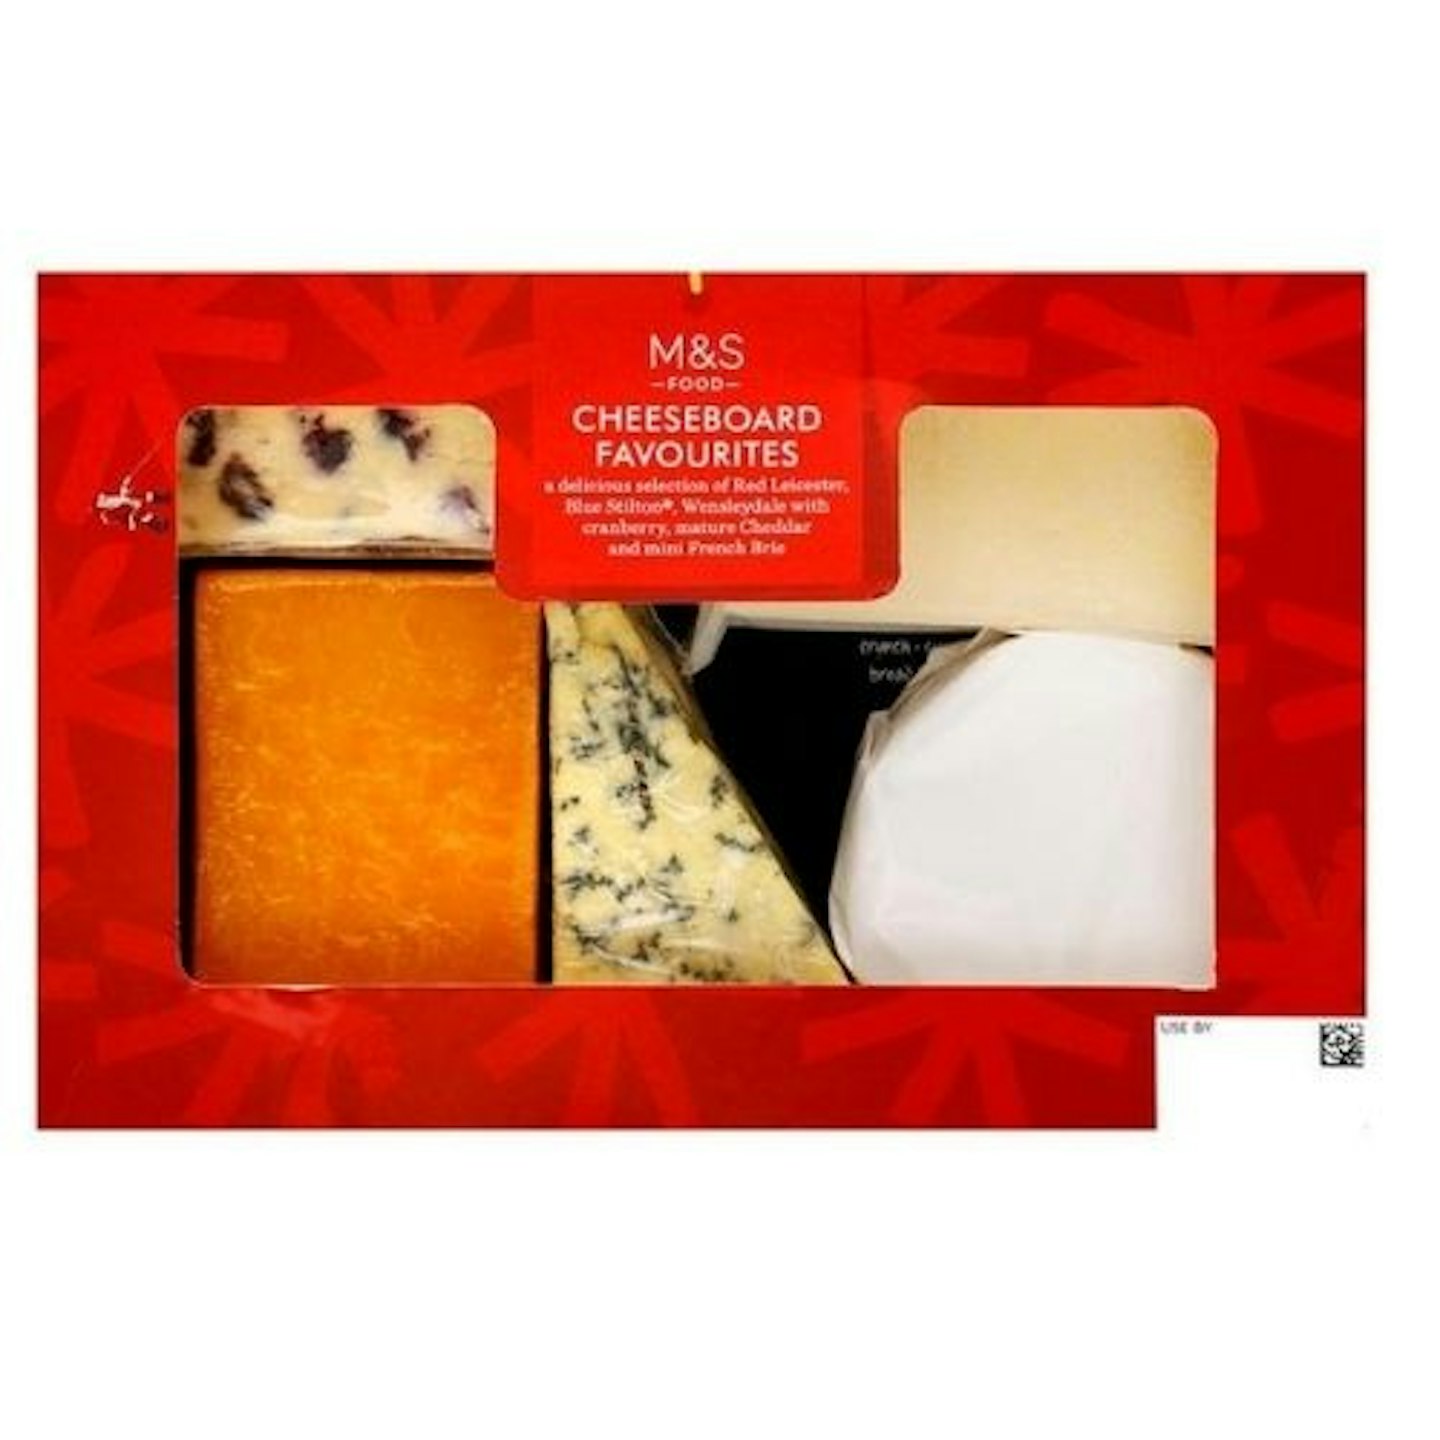 M&S Cheeseboard Favourites